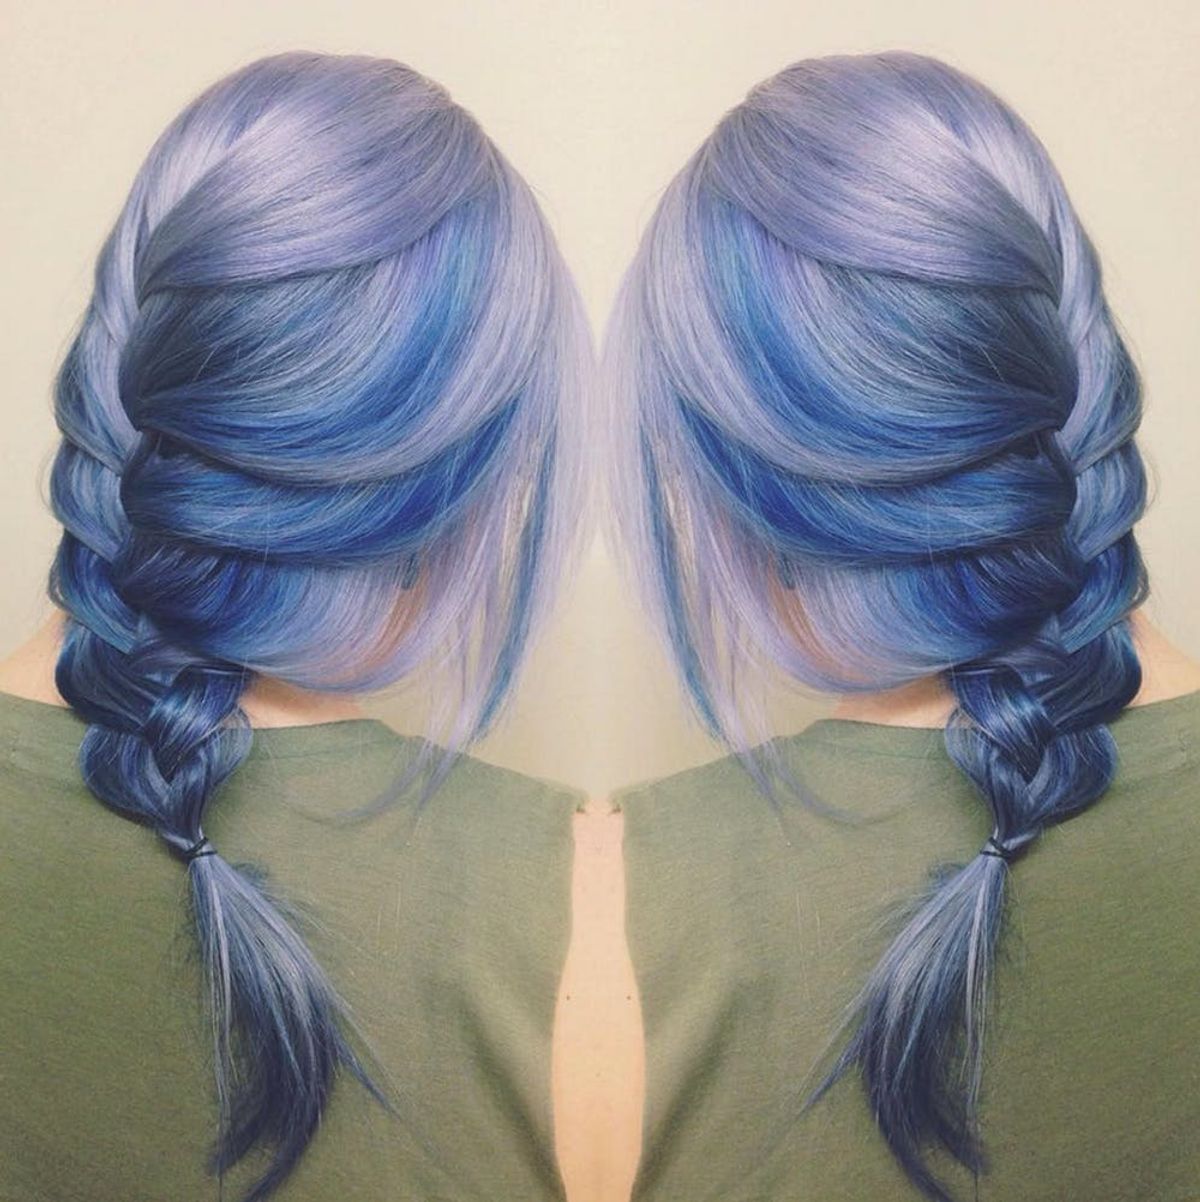 Moonstone Hair Is About to Be the Next Big Rainbow Hair Trend